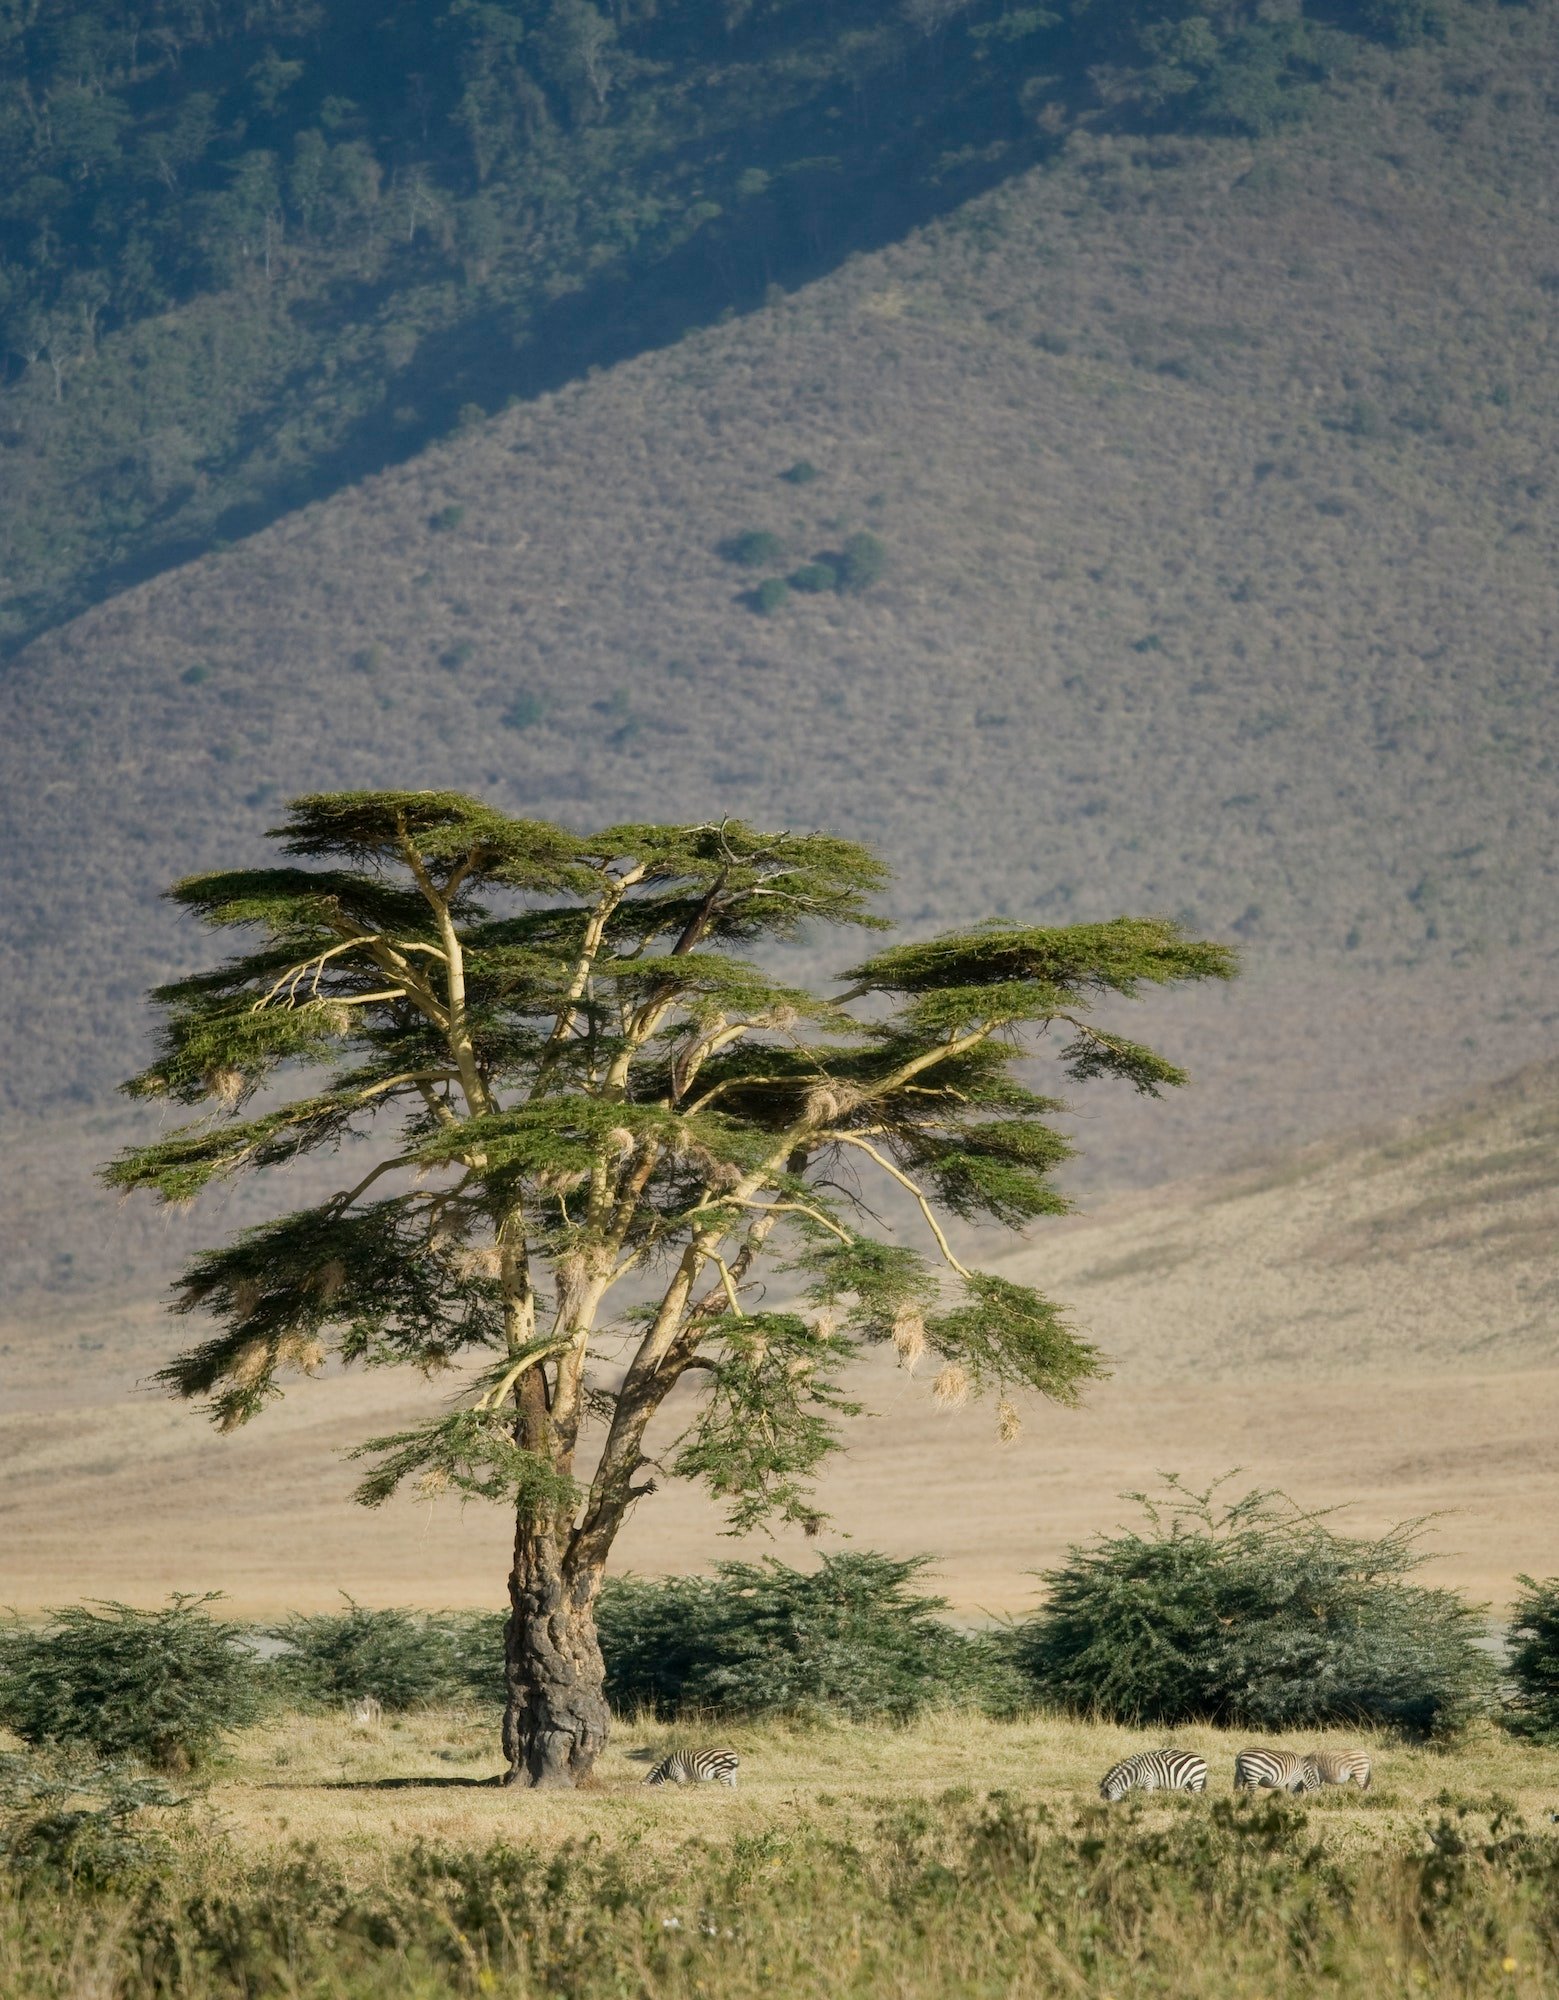 View of Ngorongoro Crater, Tanzania, East African Destinations - African Adventure Hotspots